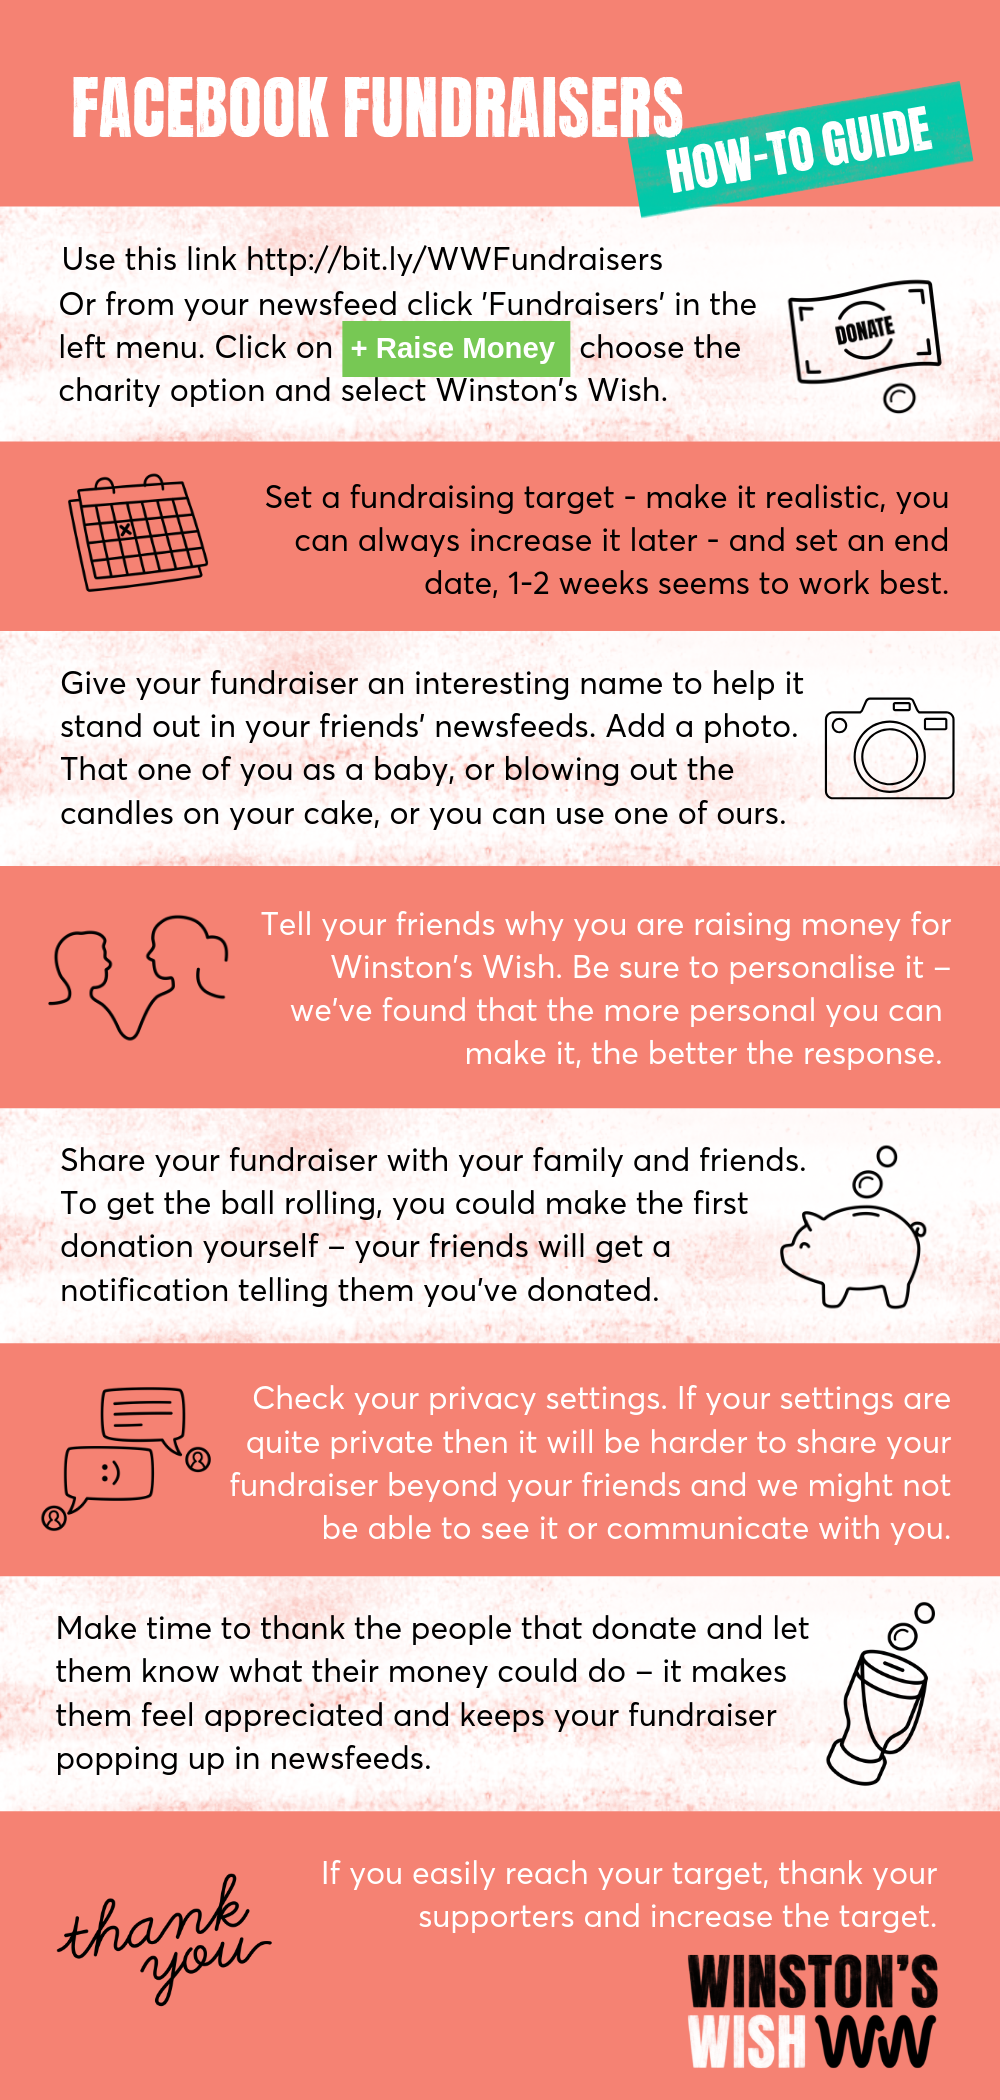 Facebook fundraisers how to guide